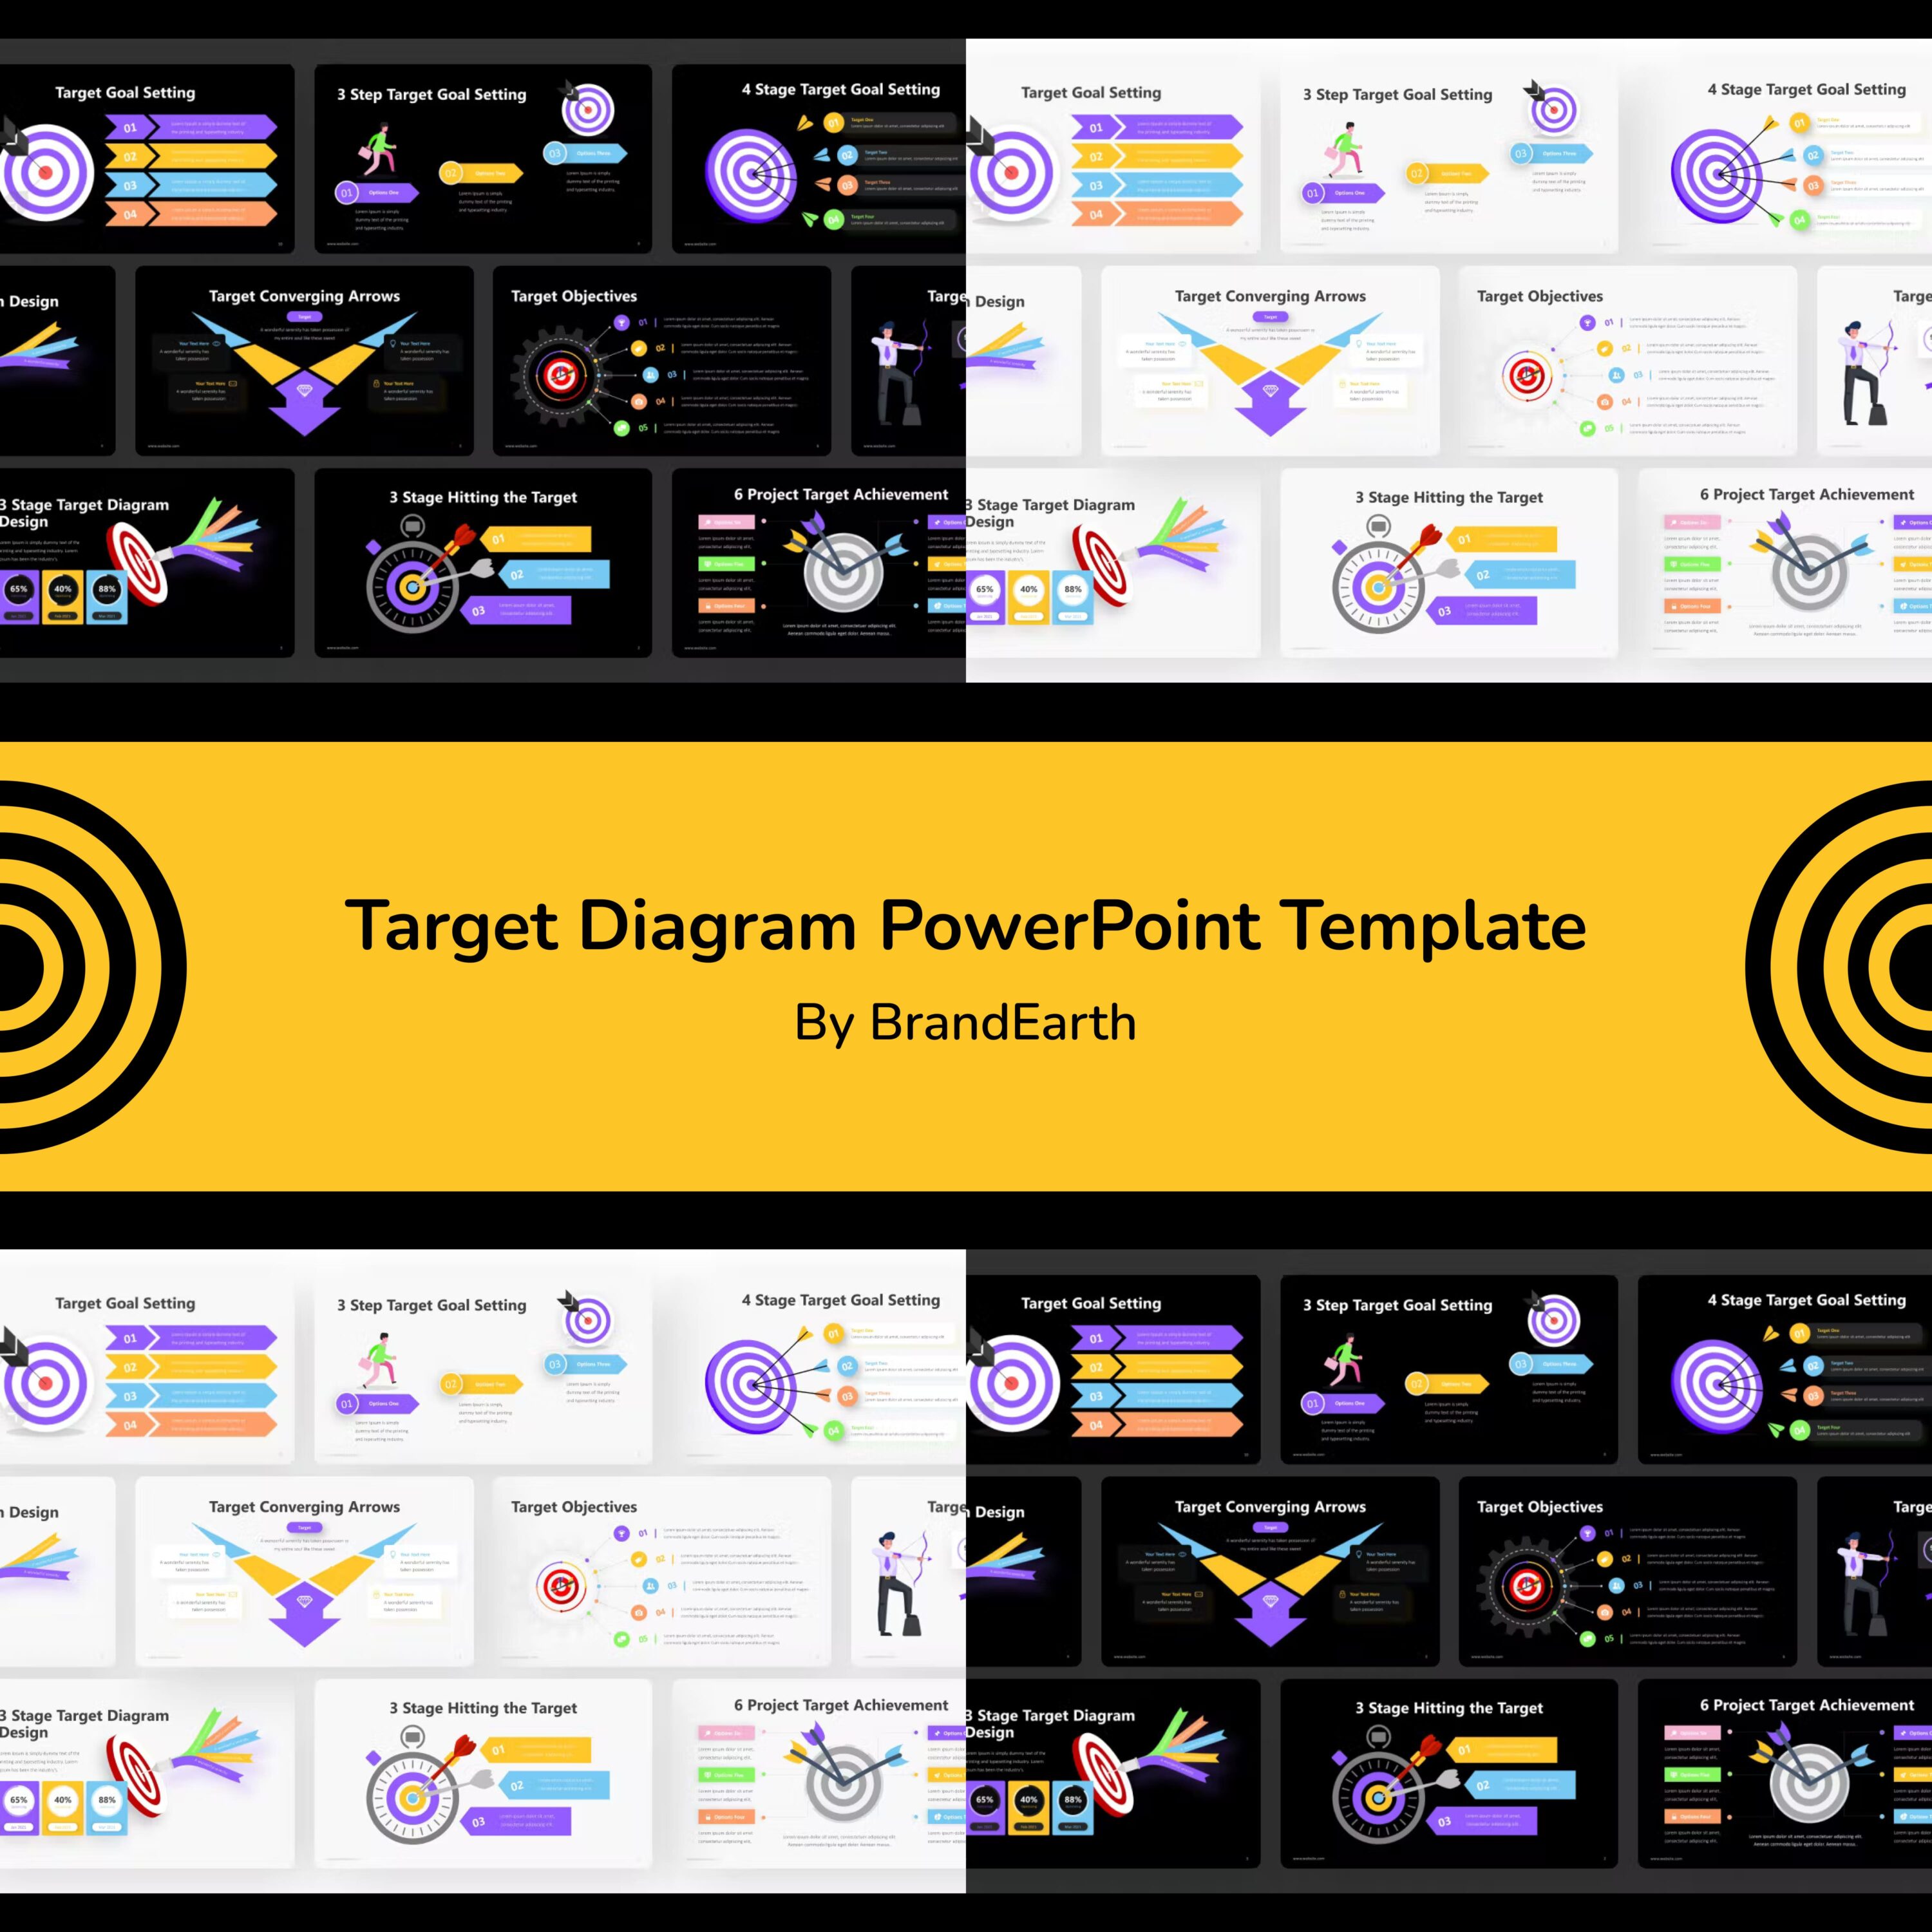 Target Diagram PowerPoint Template cover.